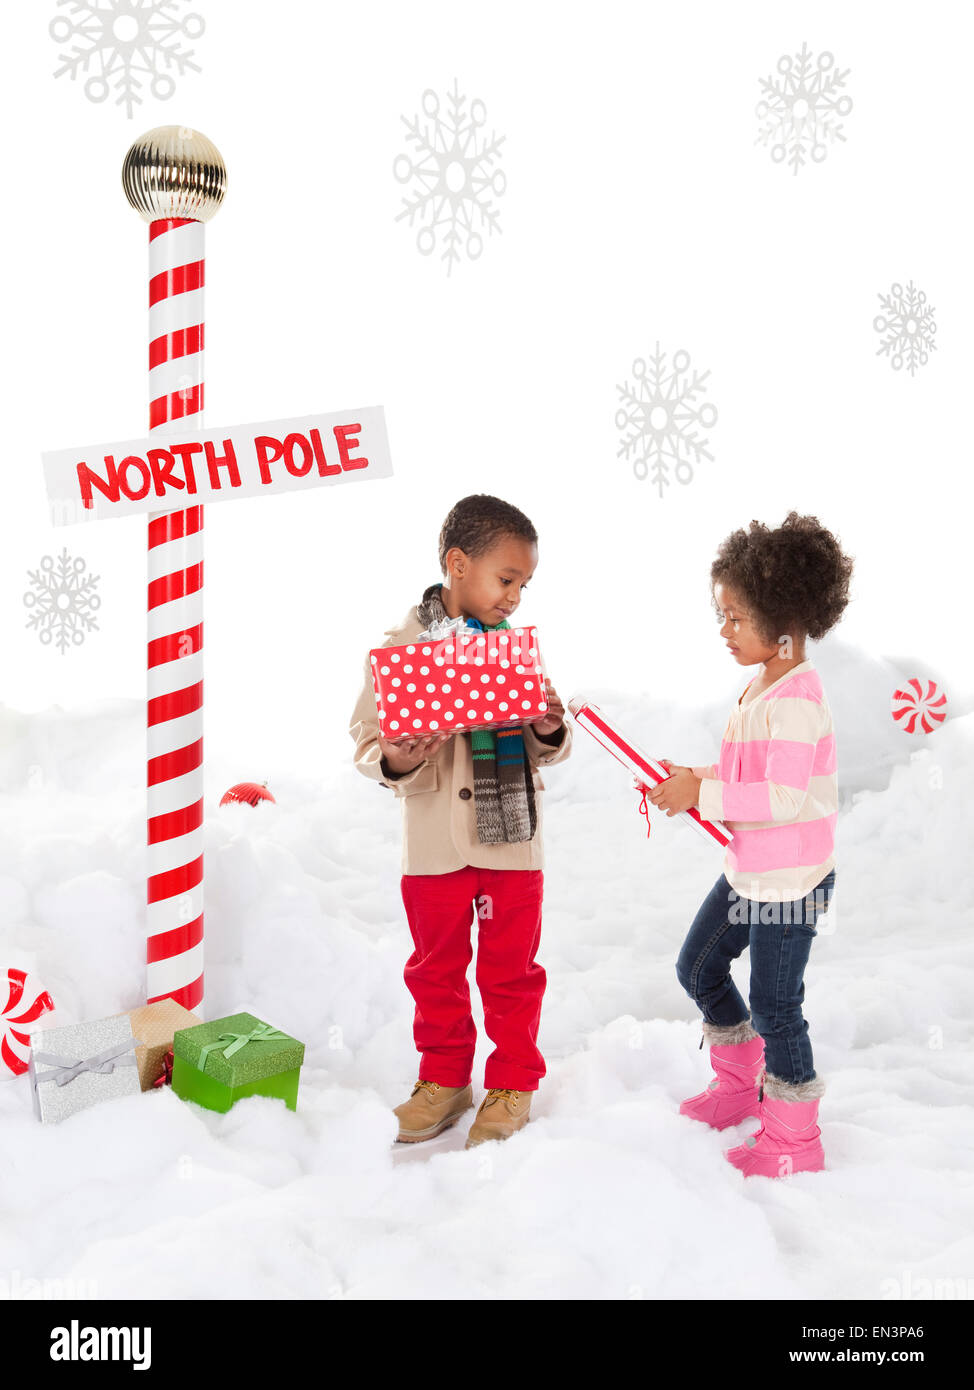 Boy (4-5) and girl (4-5) standing next to North Pole sign Stock Photo